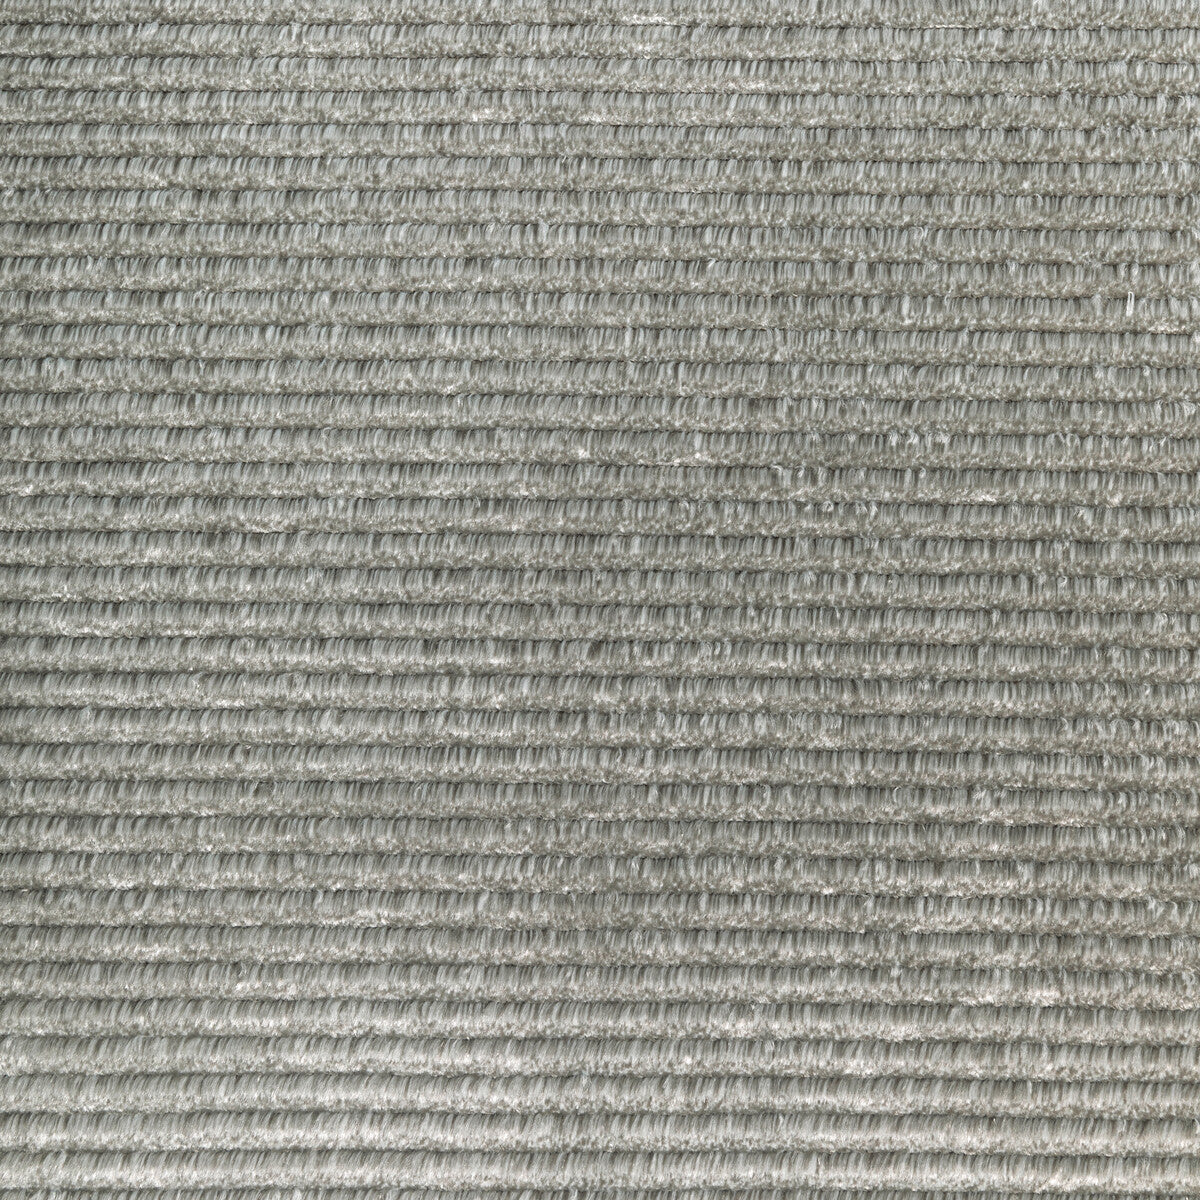 Justly Famous fabric in silver color - pattern 33950.11.0 - by Kravet Couture in the Modern Luxe III collection